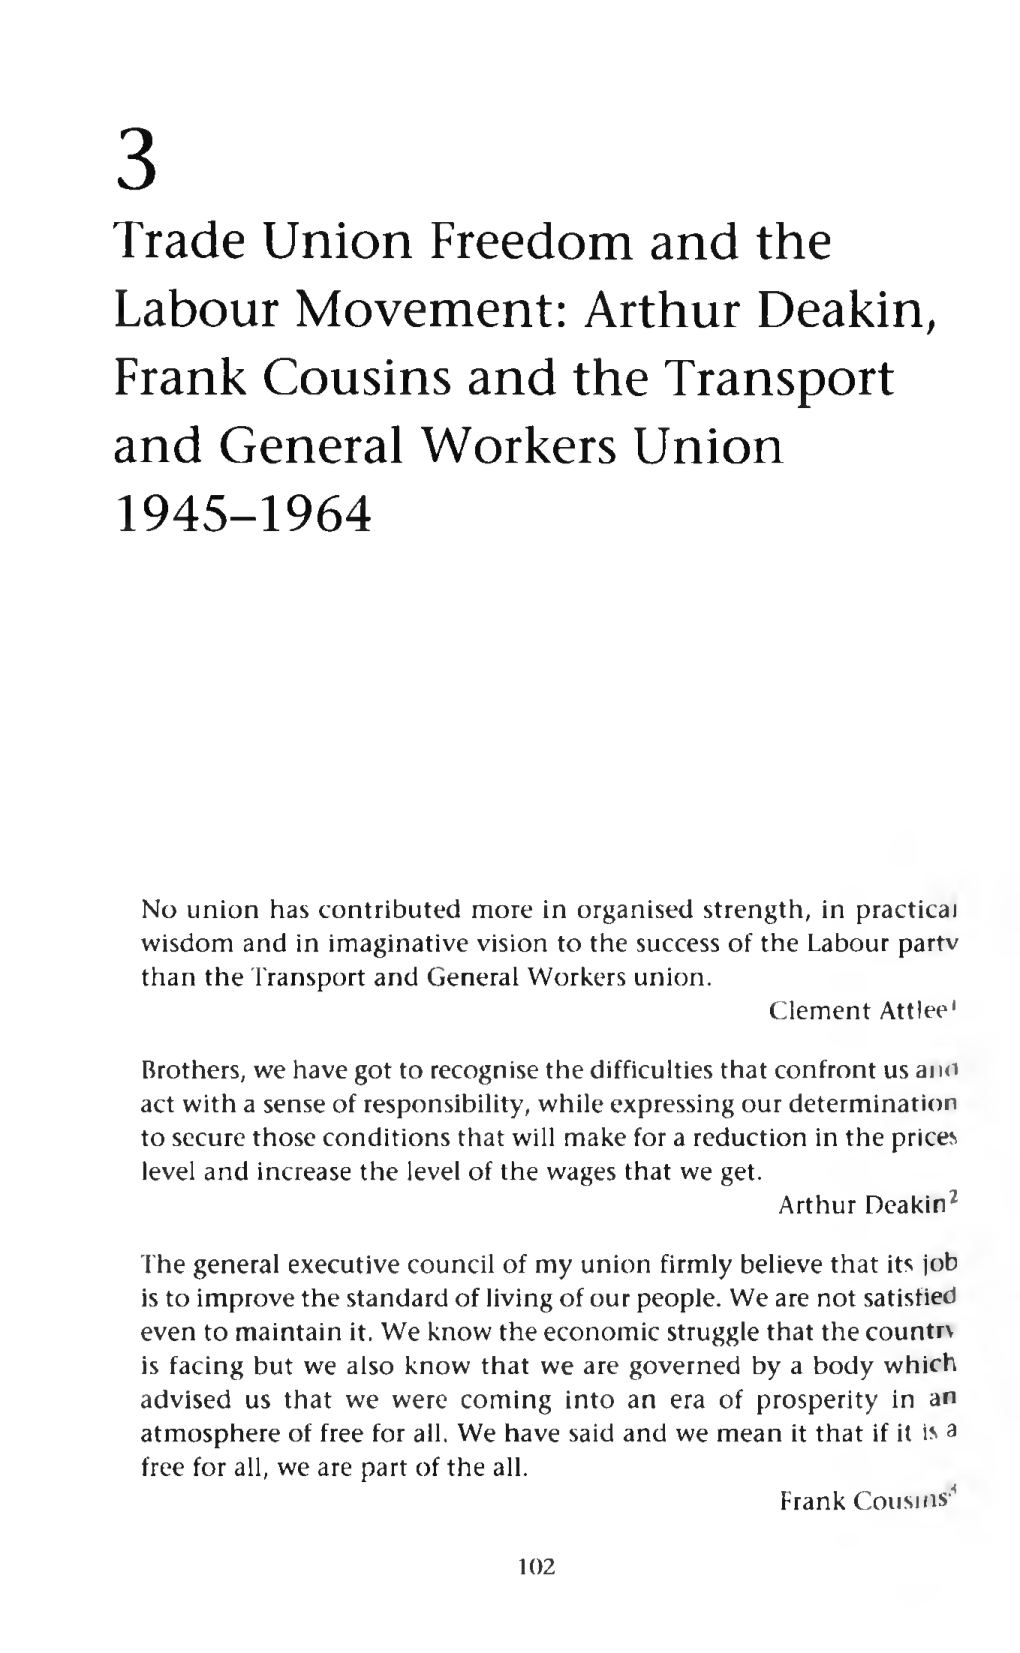 Arthur Deakin, Frank Cousins and the Transport and General Workers Union 1945-1964